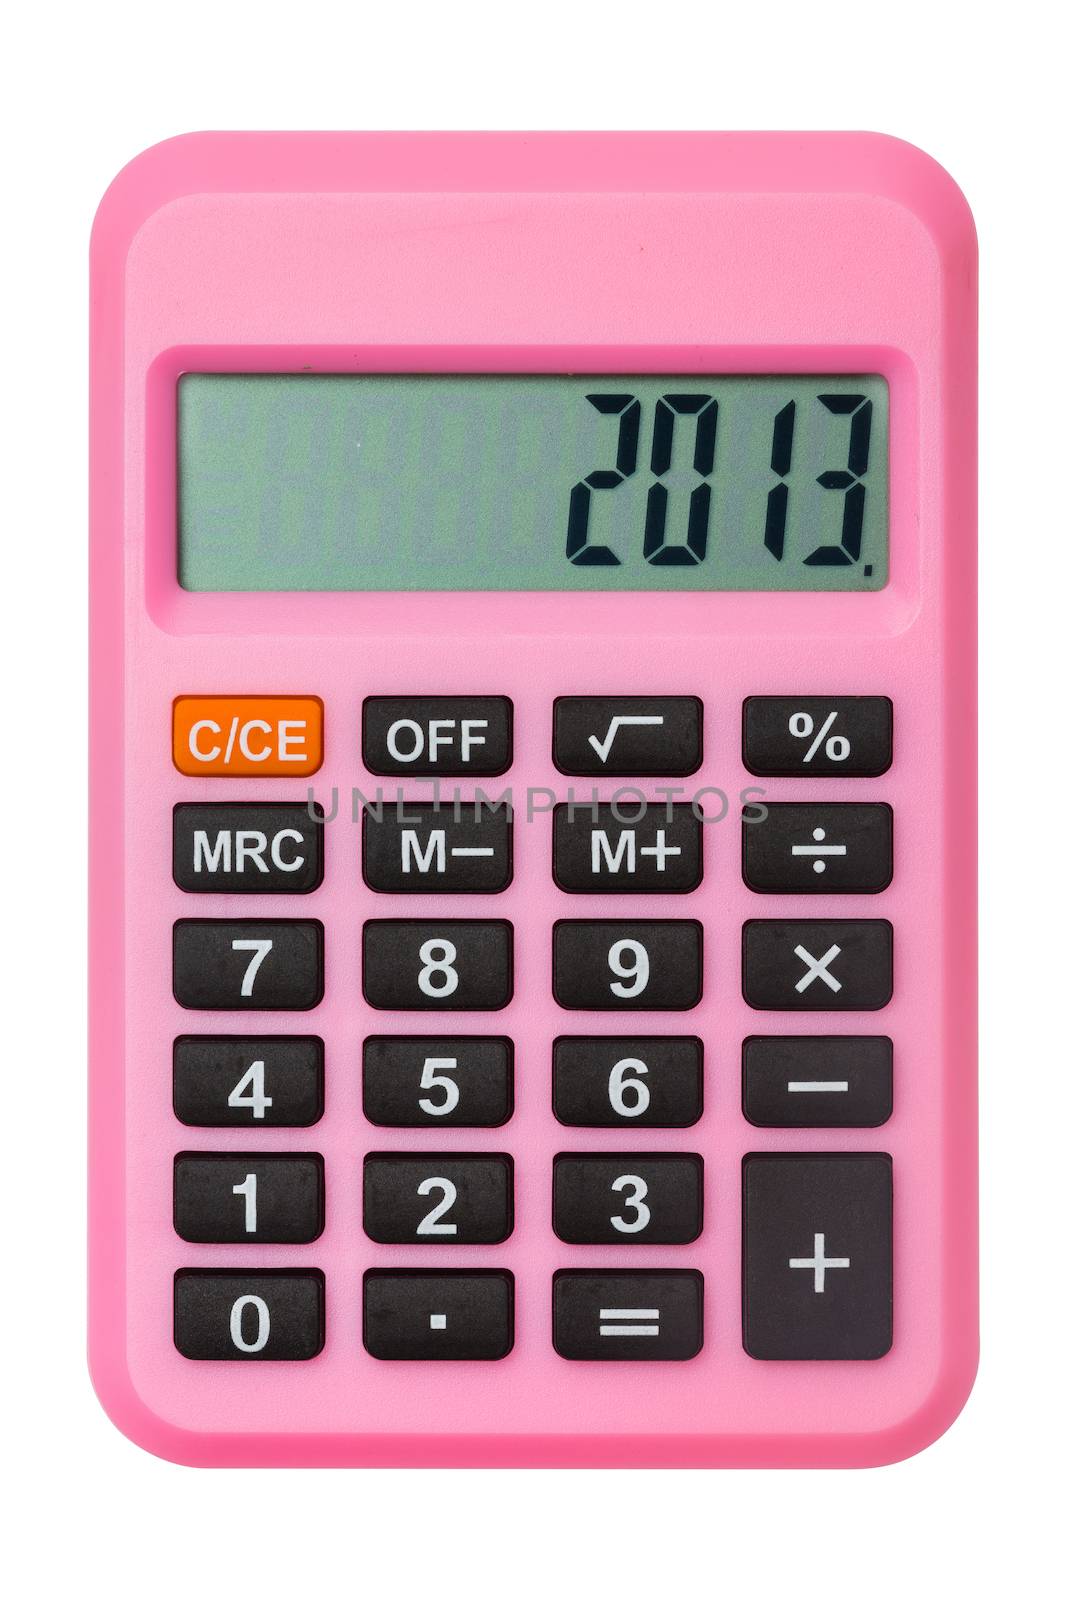 Pink calculator by smuay